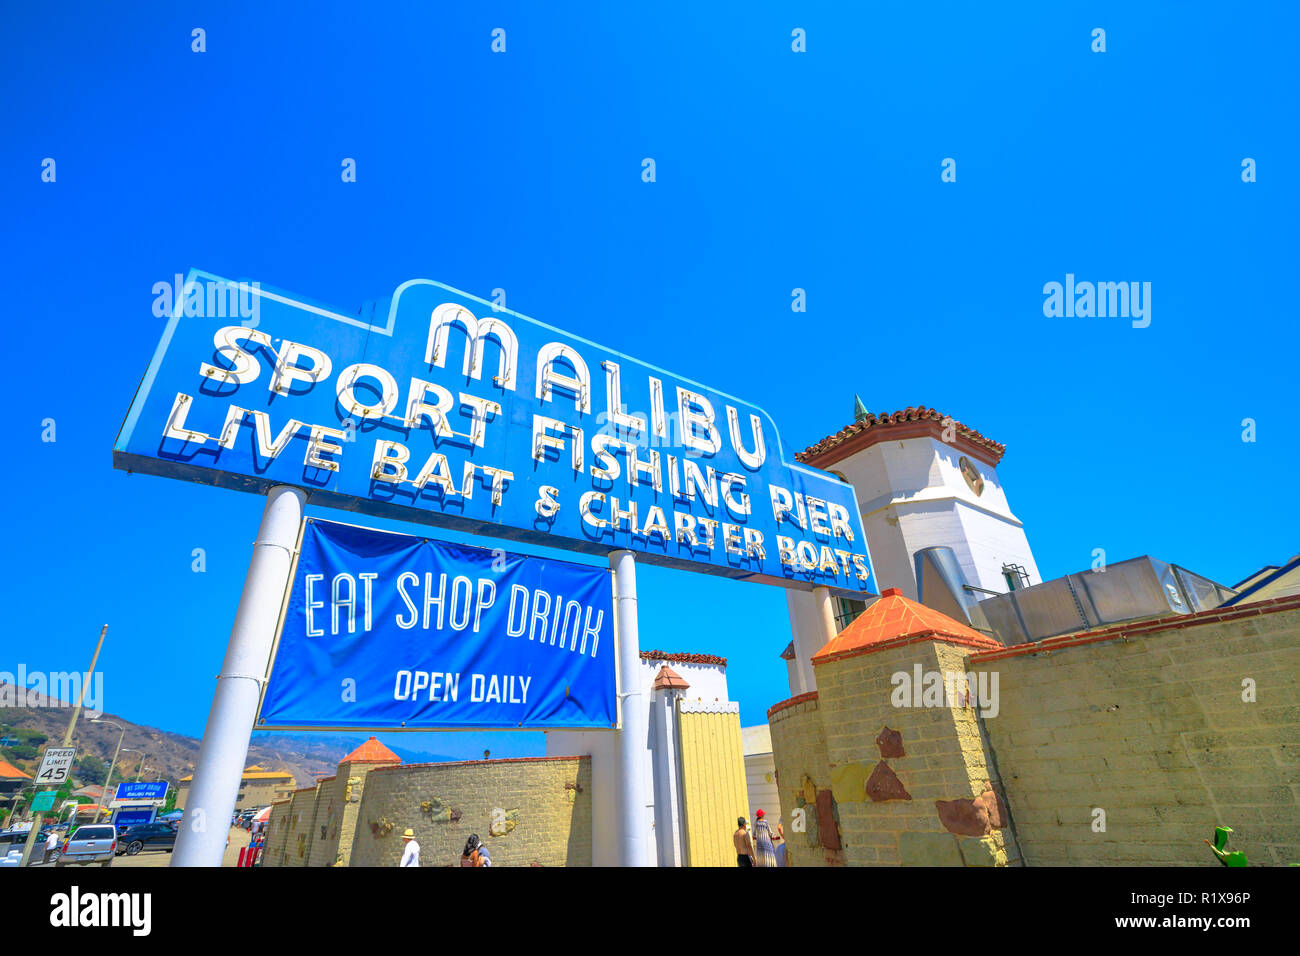 Malibu, California, United States - August 7, 2018: historic Malibu Pier Sign, one of the longest piers in California, on Pacific Coast Highway, 11 miles west of Santa Monica. Sunny day, blue sky. Stock Photo